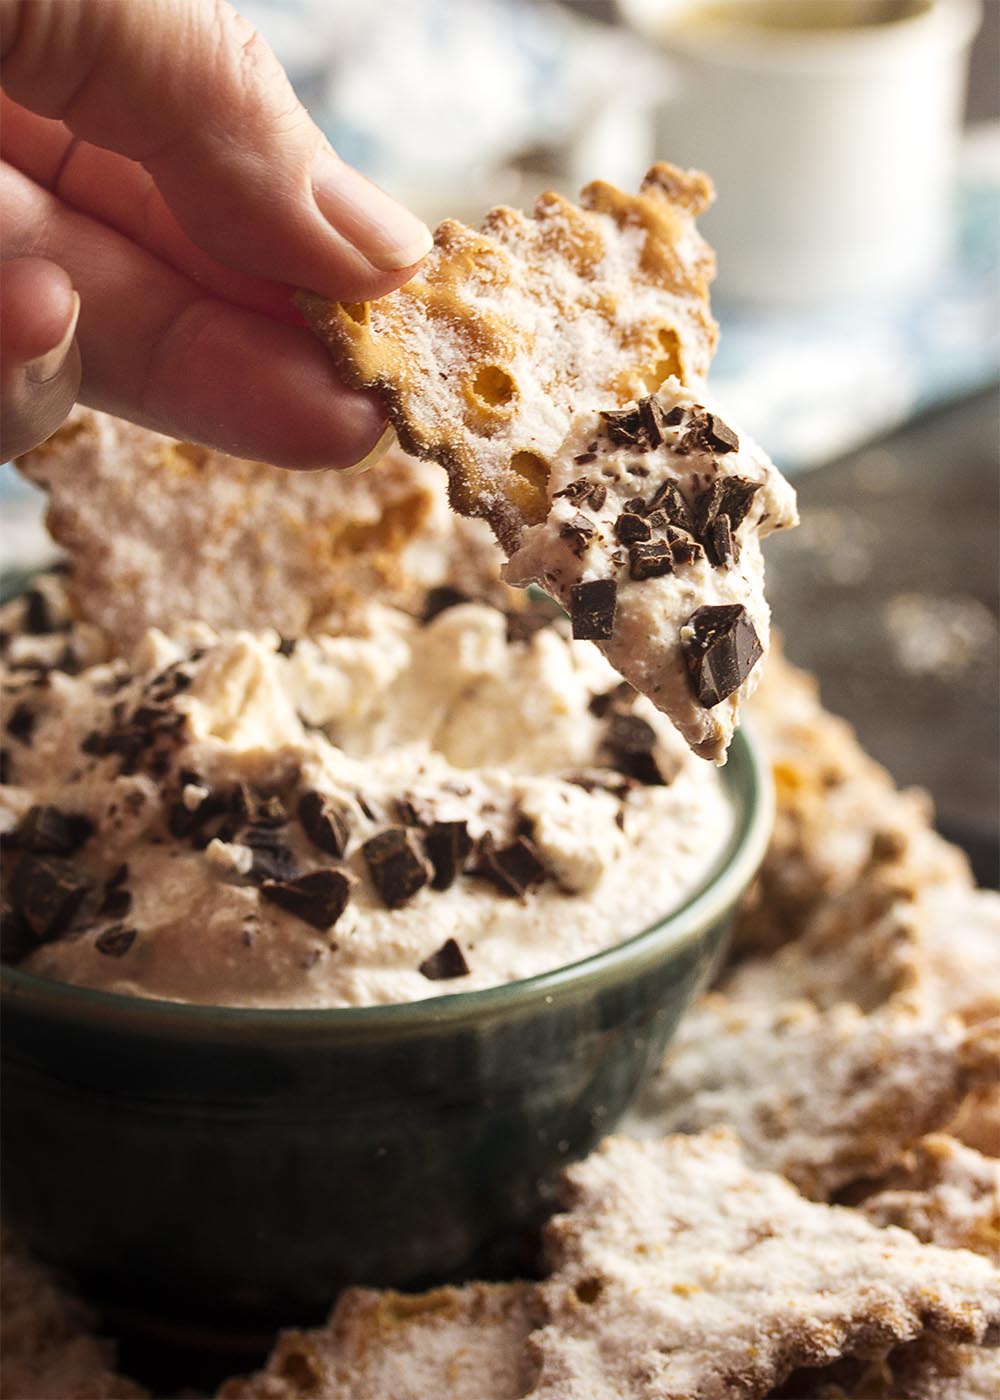 This easy to make ricotta cannoli dip is full of cinnamon and fresh ricotta and topped with chopped chocolate. Perfect for a party! All the yumminess of cannolis without the fuss and bother of making and filling cannoli shells. | justalittlebitofbacon.com